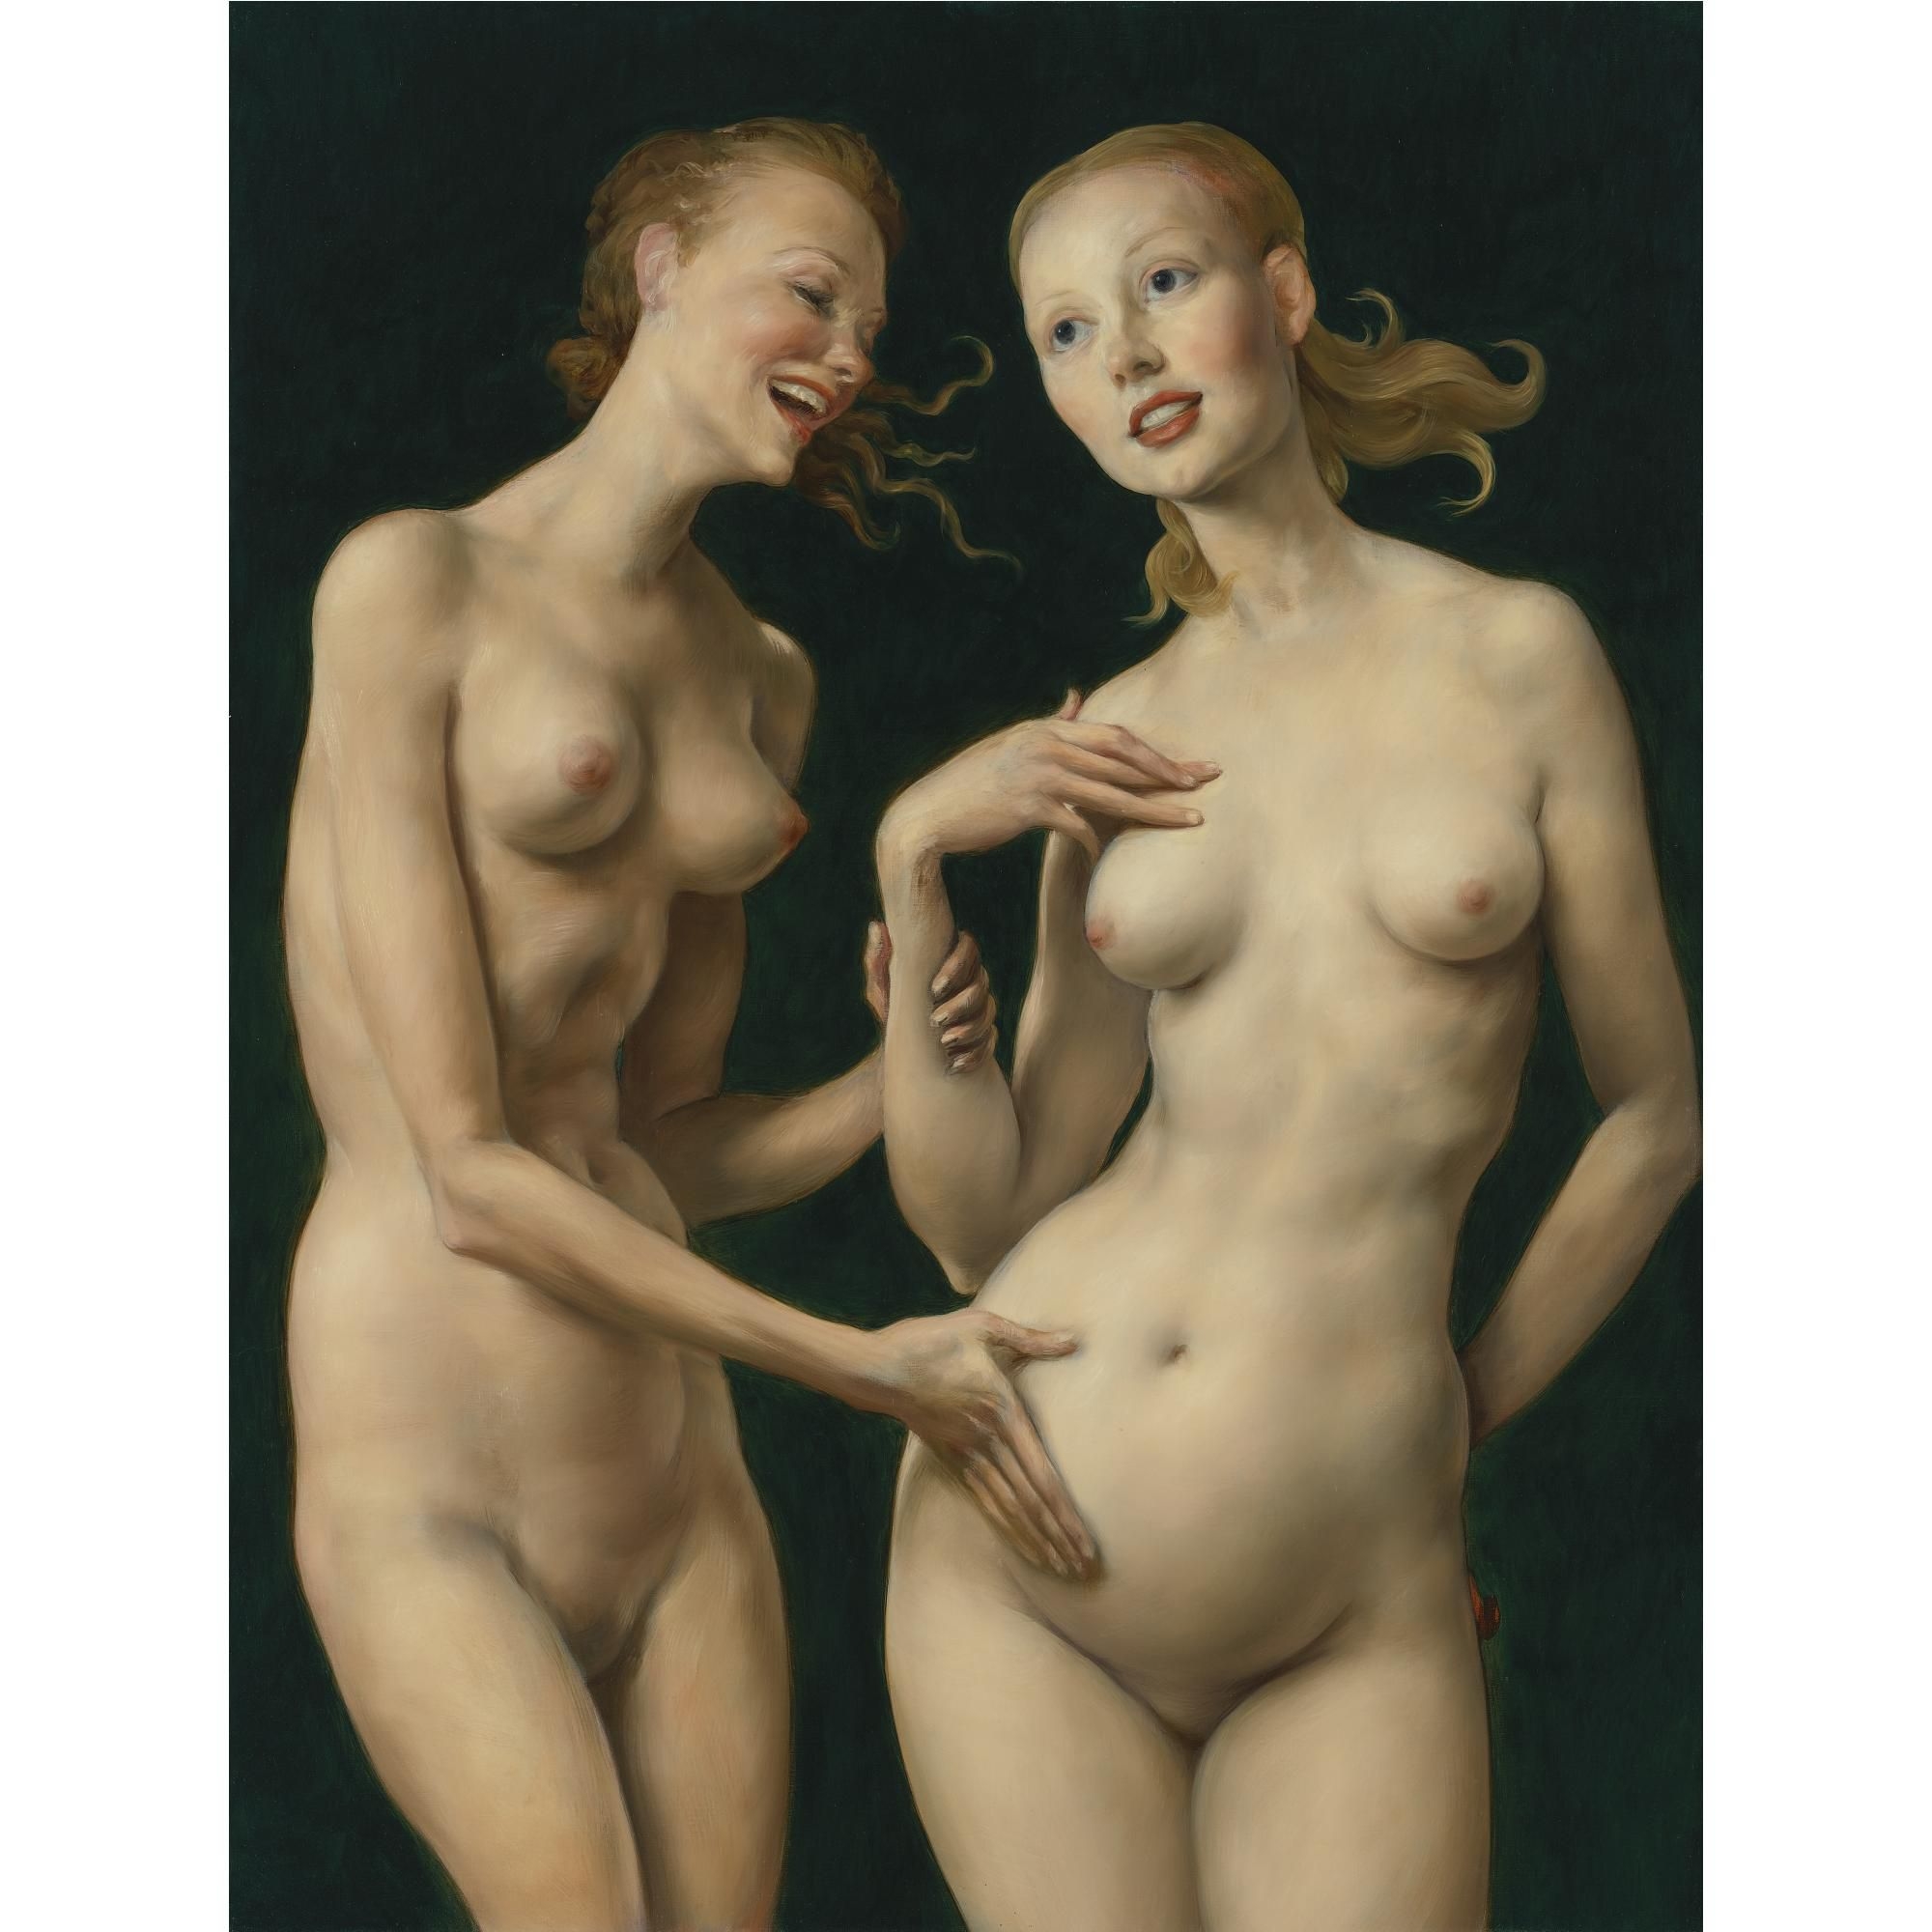 Artwork by John Currin, Nice 'N Easy, Made of oil on canvas.